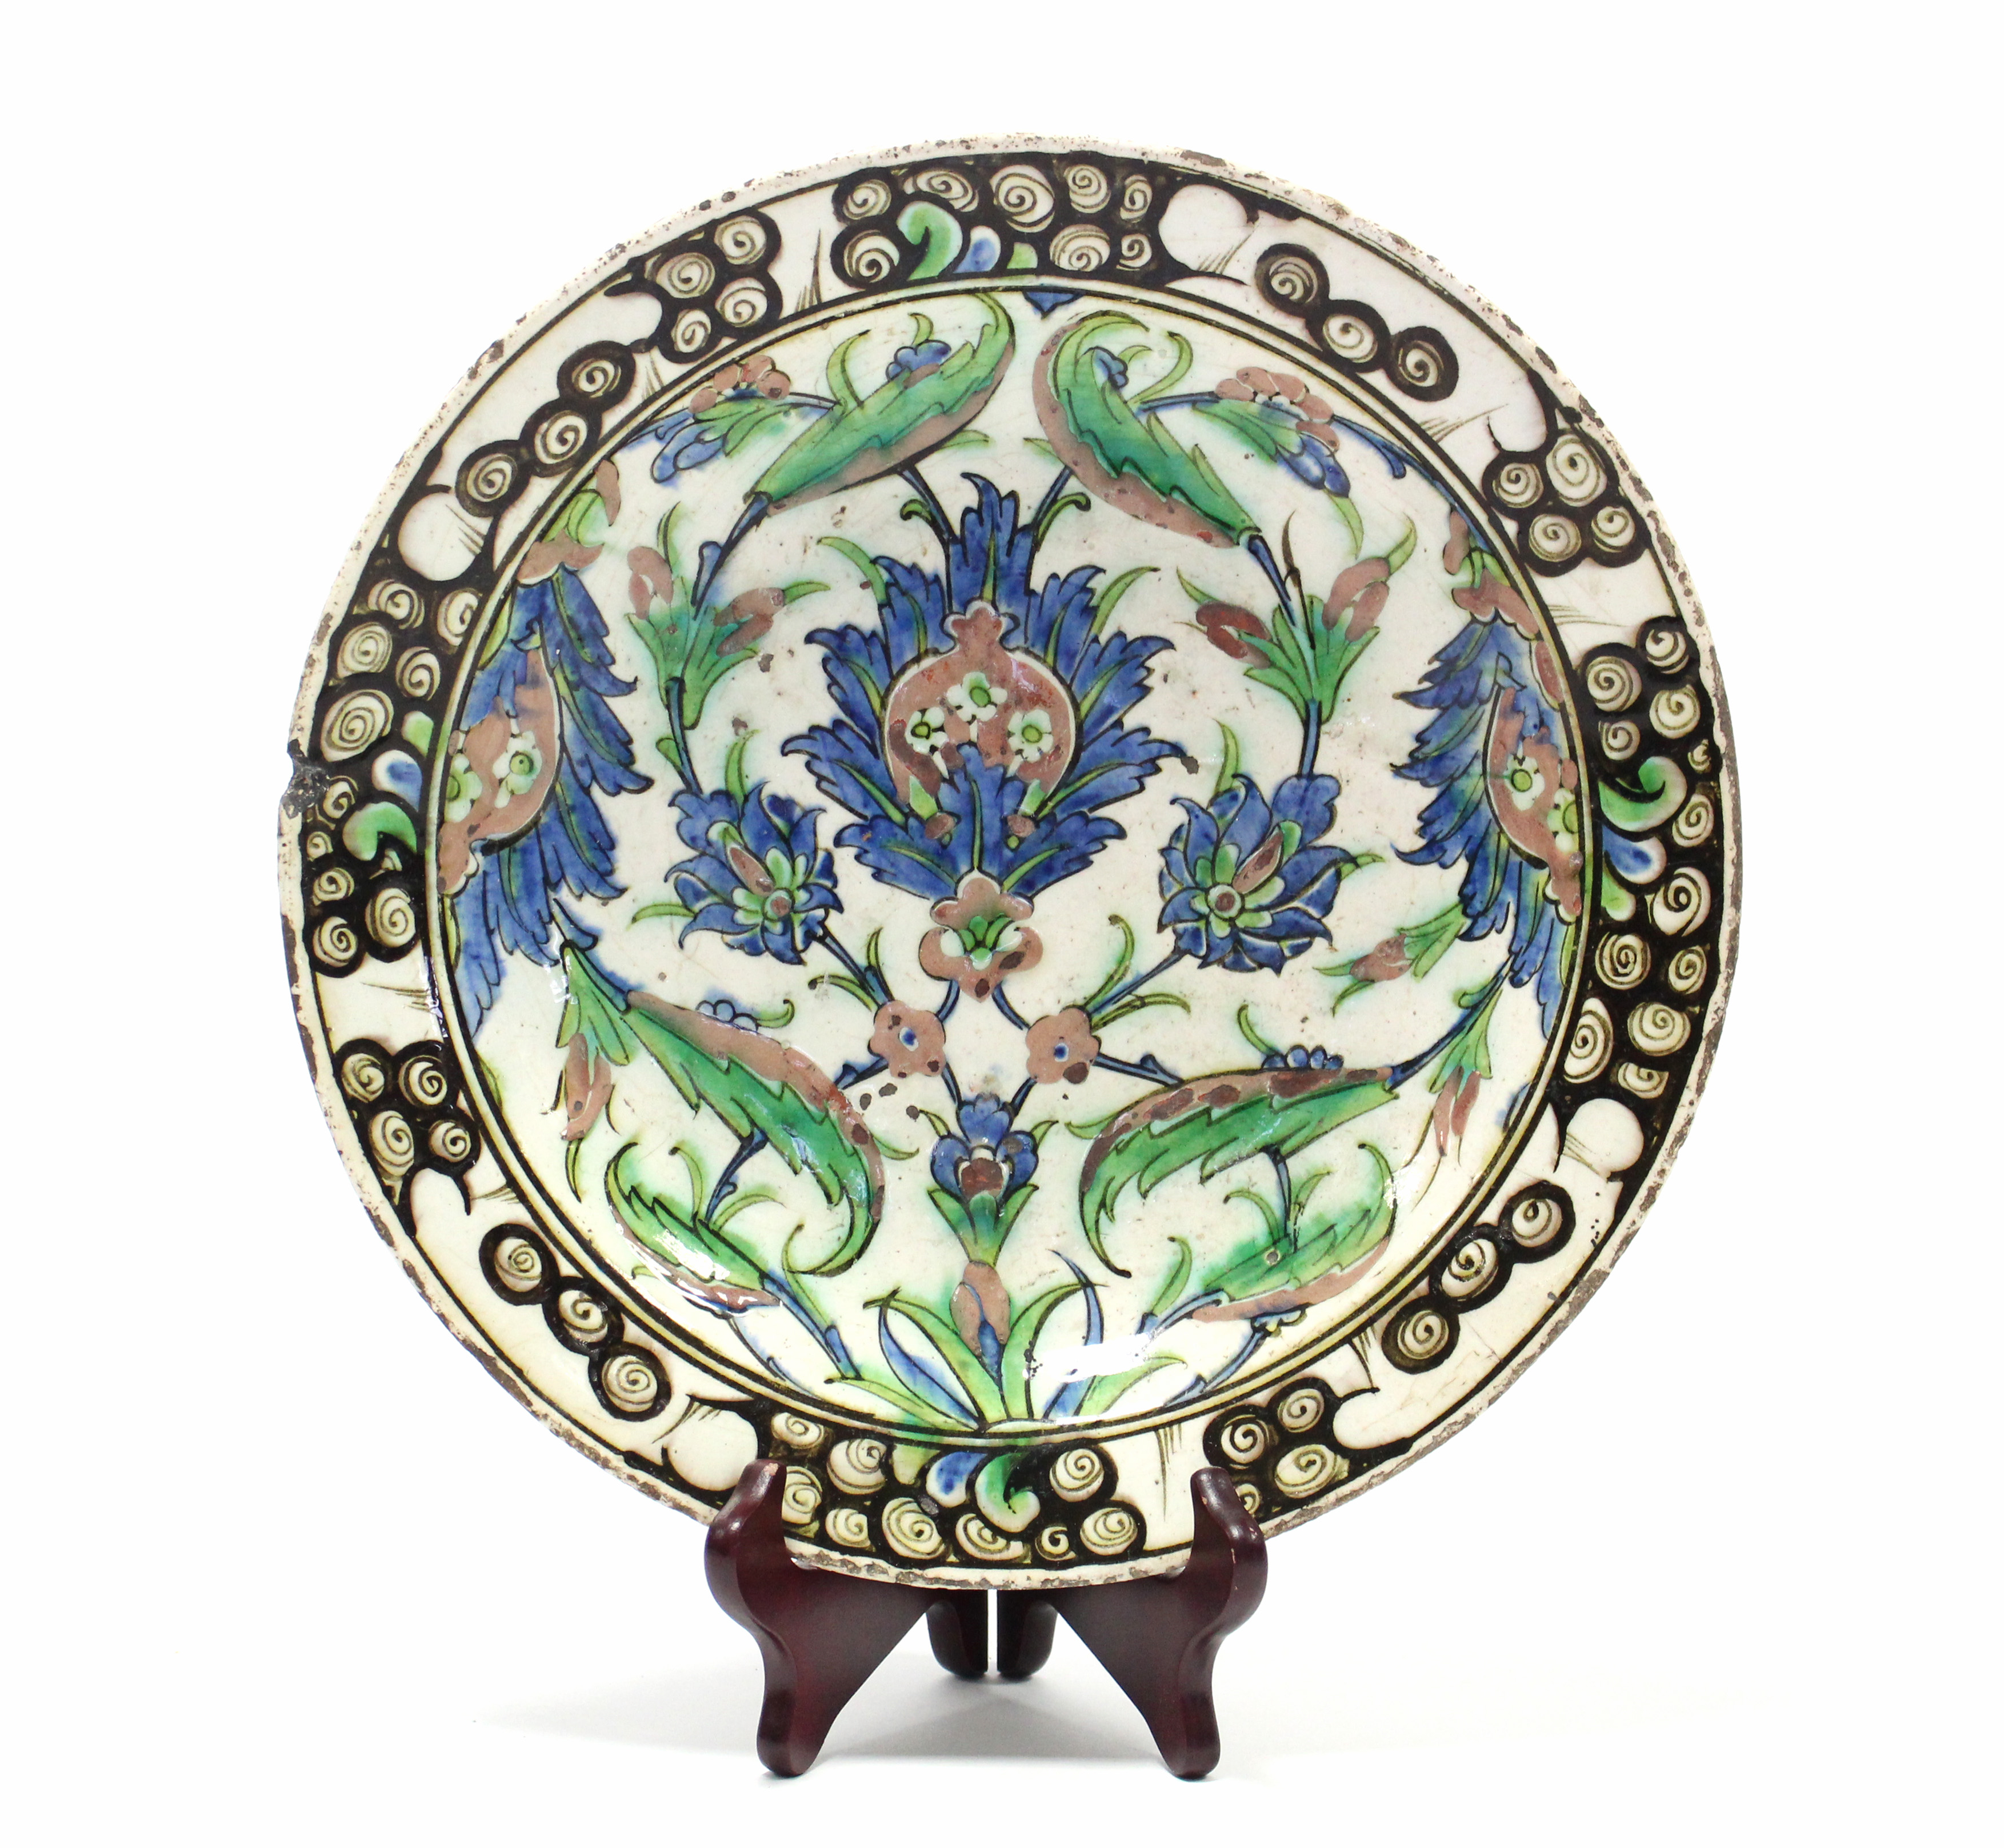 A 17th century IZNIK POTTERY SHALLOW DISH with polychrome painted stylised floral decoration - Image 2 of 6